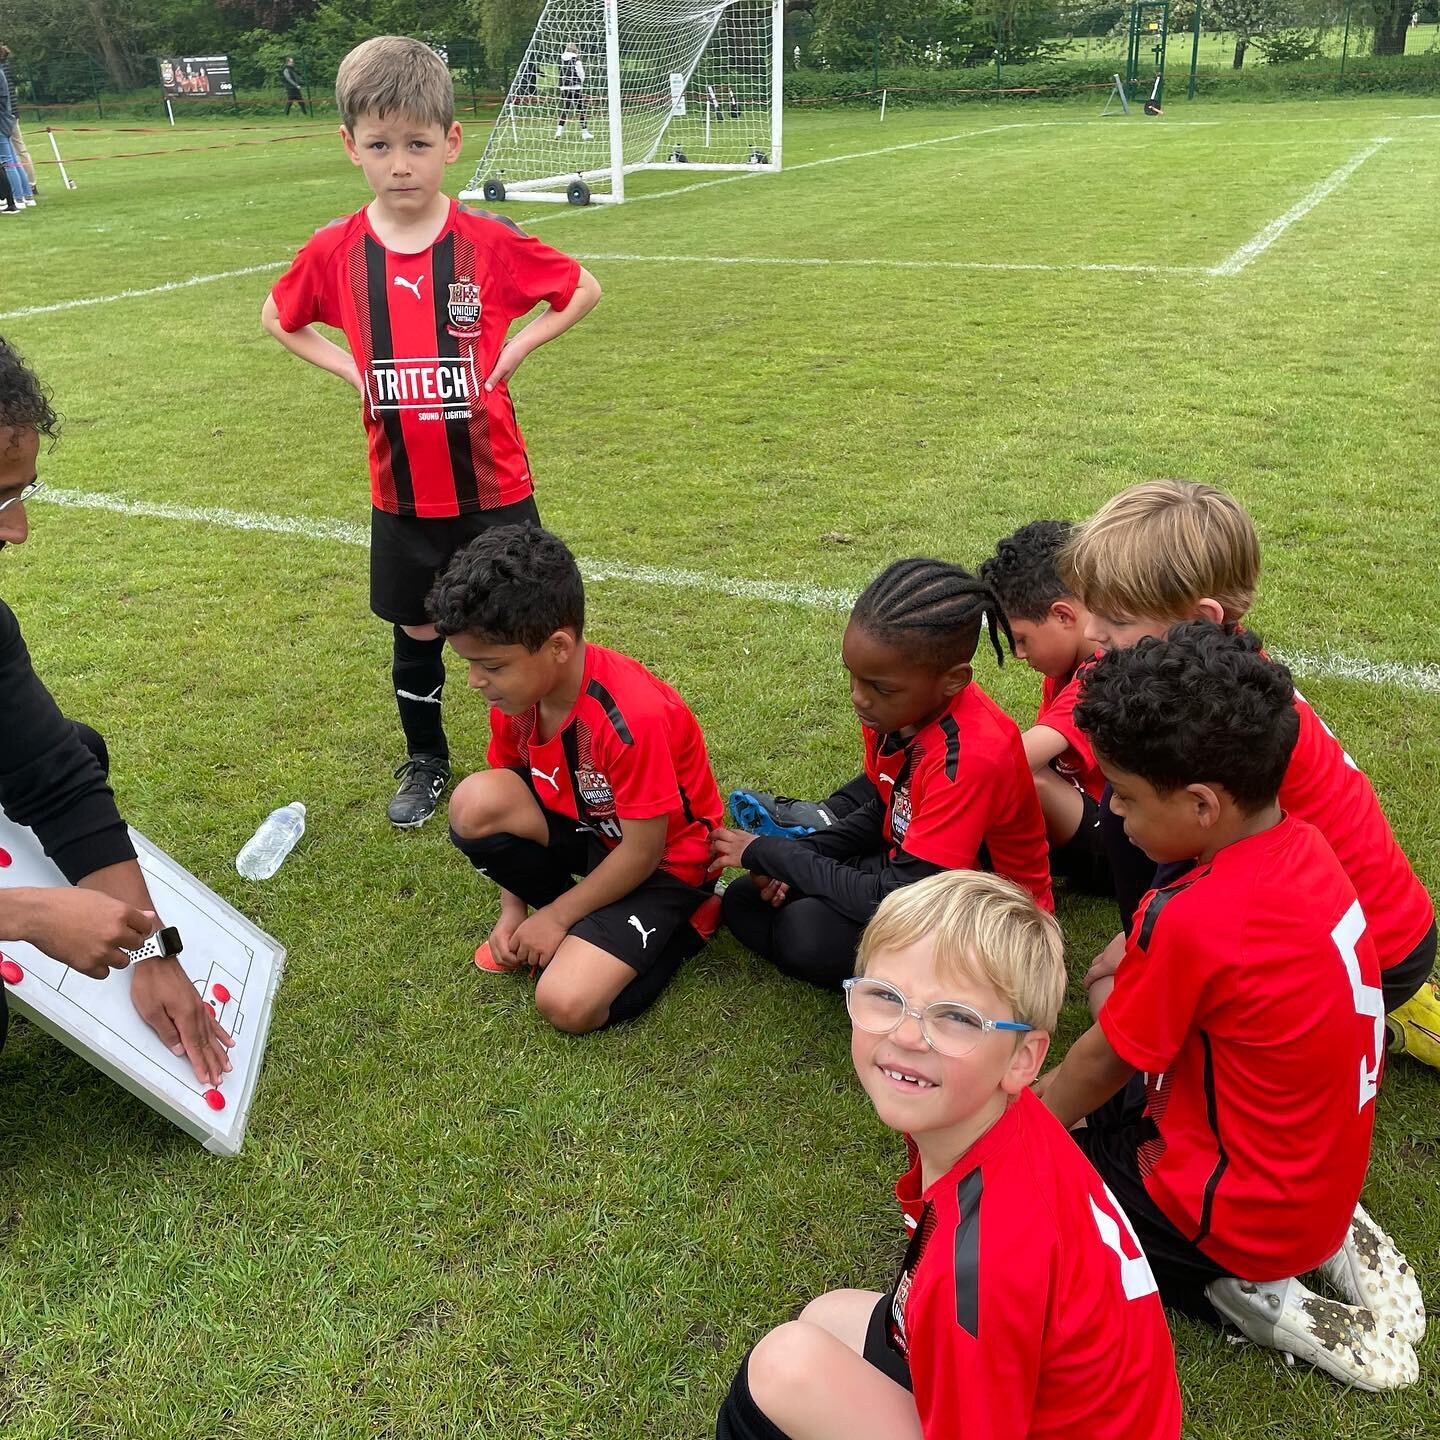 🏆🏆🏆
.
.
Good luck to these rascals in their U7 Cup Final this weekend 🟥⬛️
.
.
.
Enjoy boys ✍️🤩
.
.
#talent #youth #development #skill #futsal #talentid #southlondon #cupfinal #memories #fun #enjoy #unique #beunique